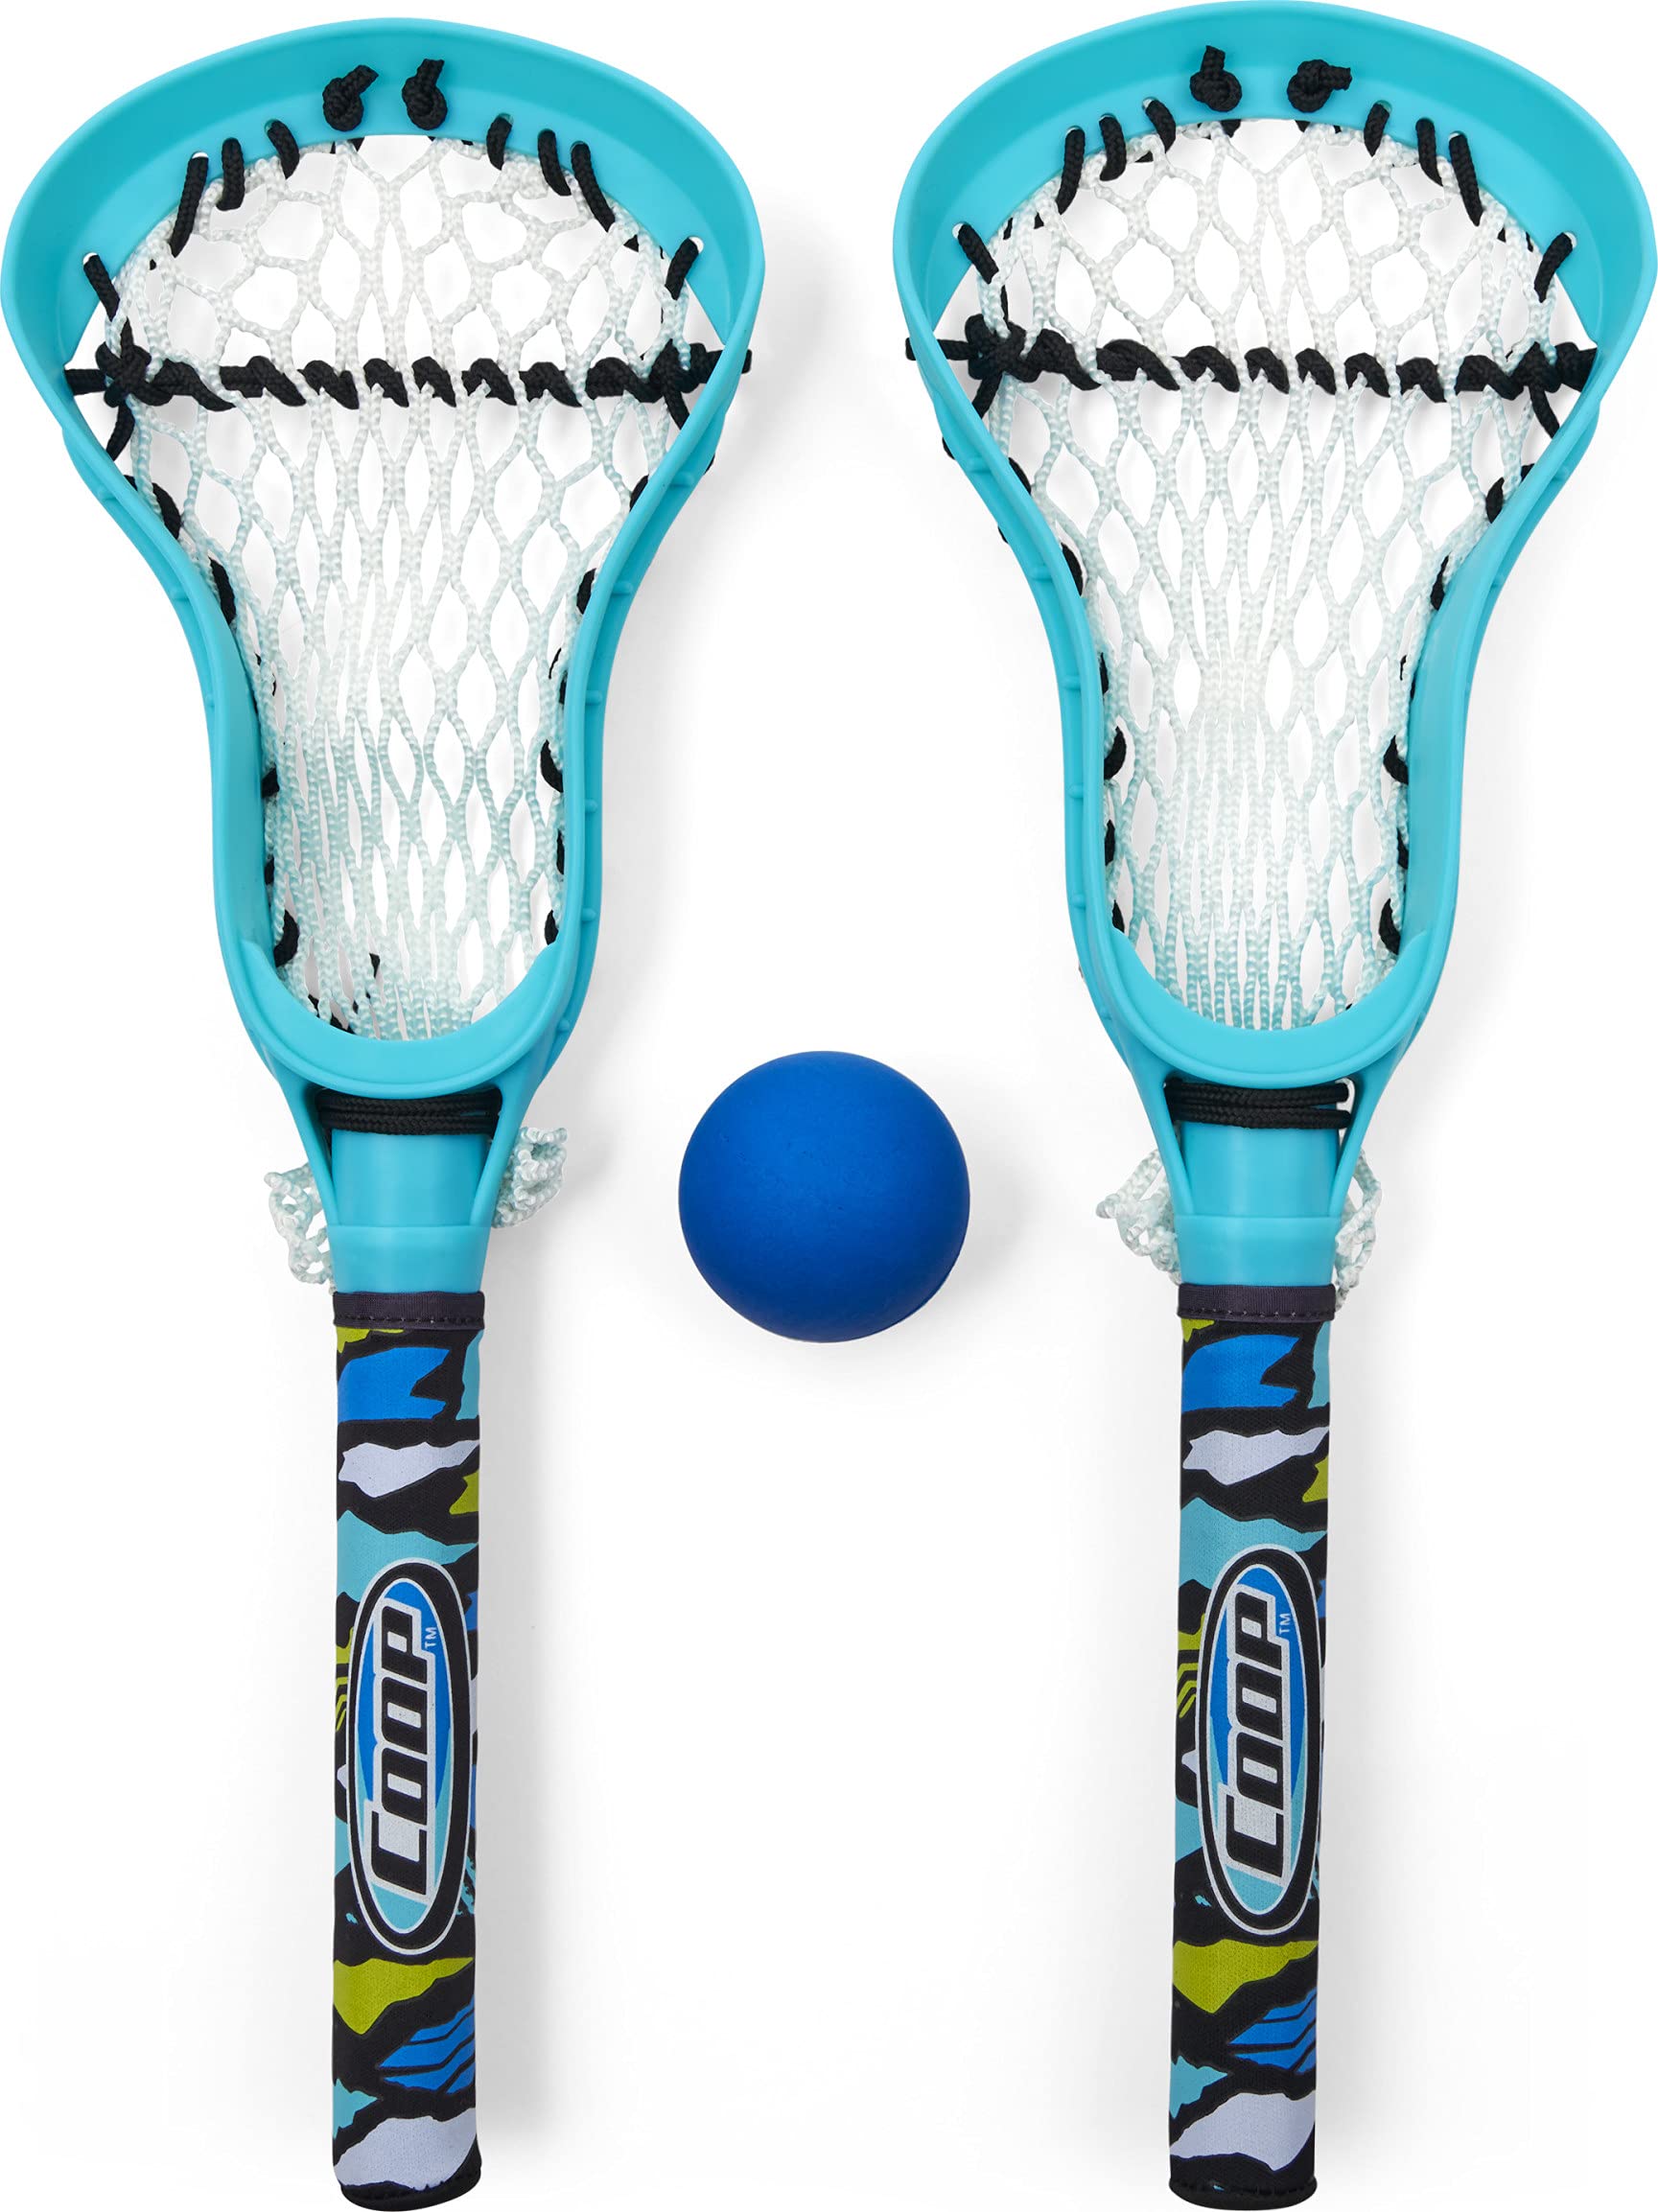 COOP Hydro Lacrosse - Blue or Green: $6.93 + FS/Prime